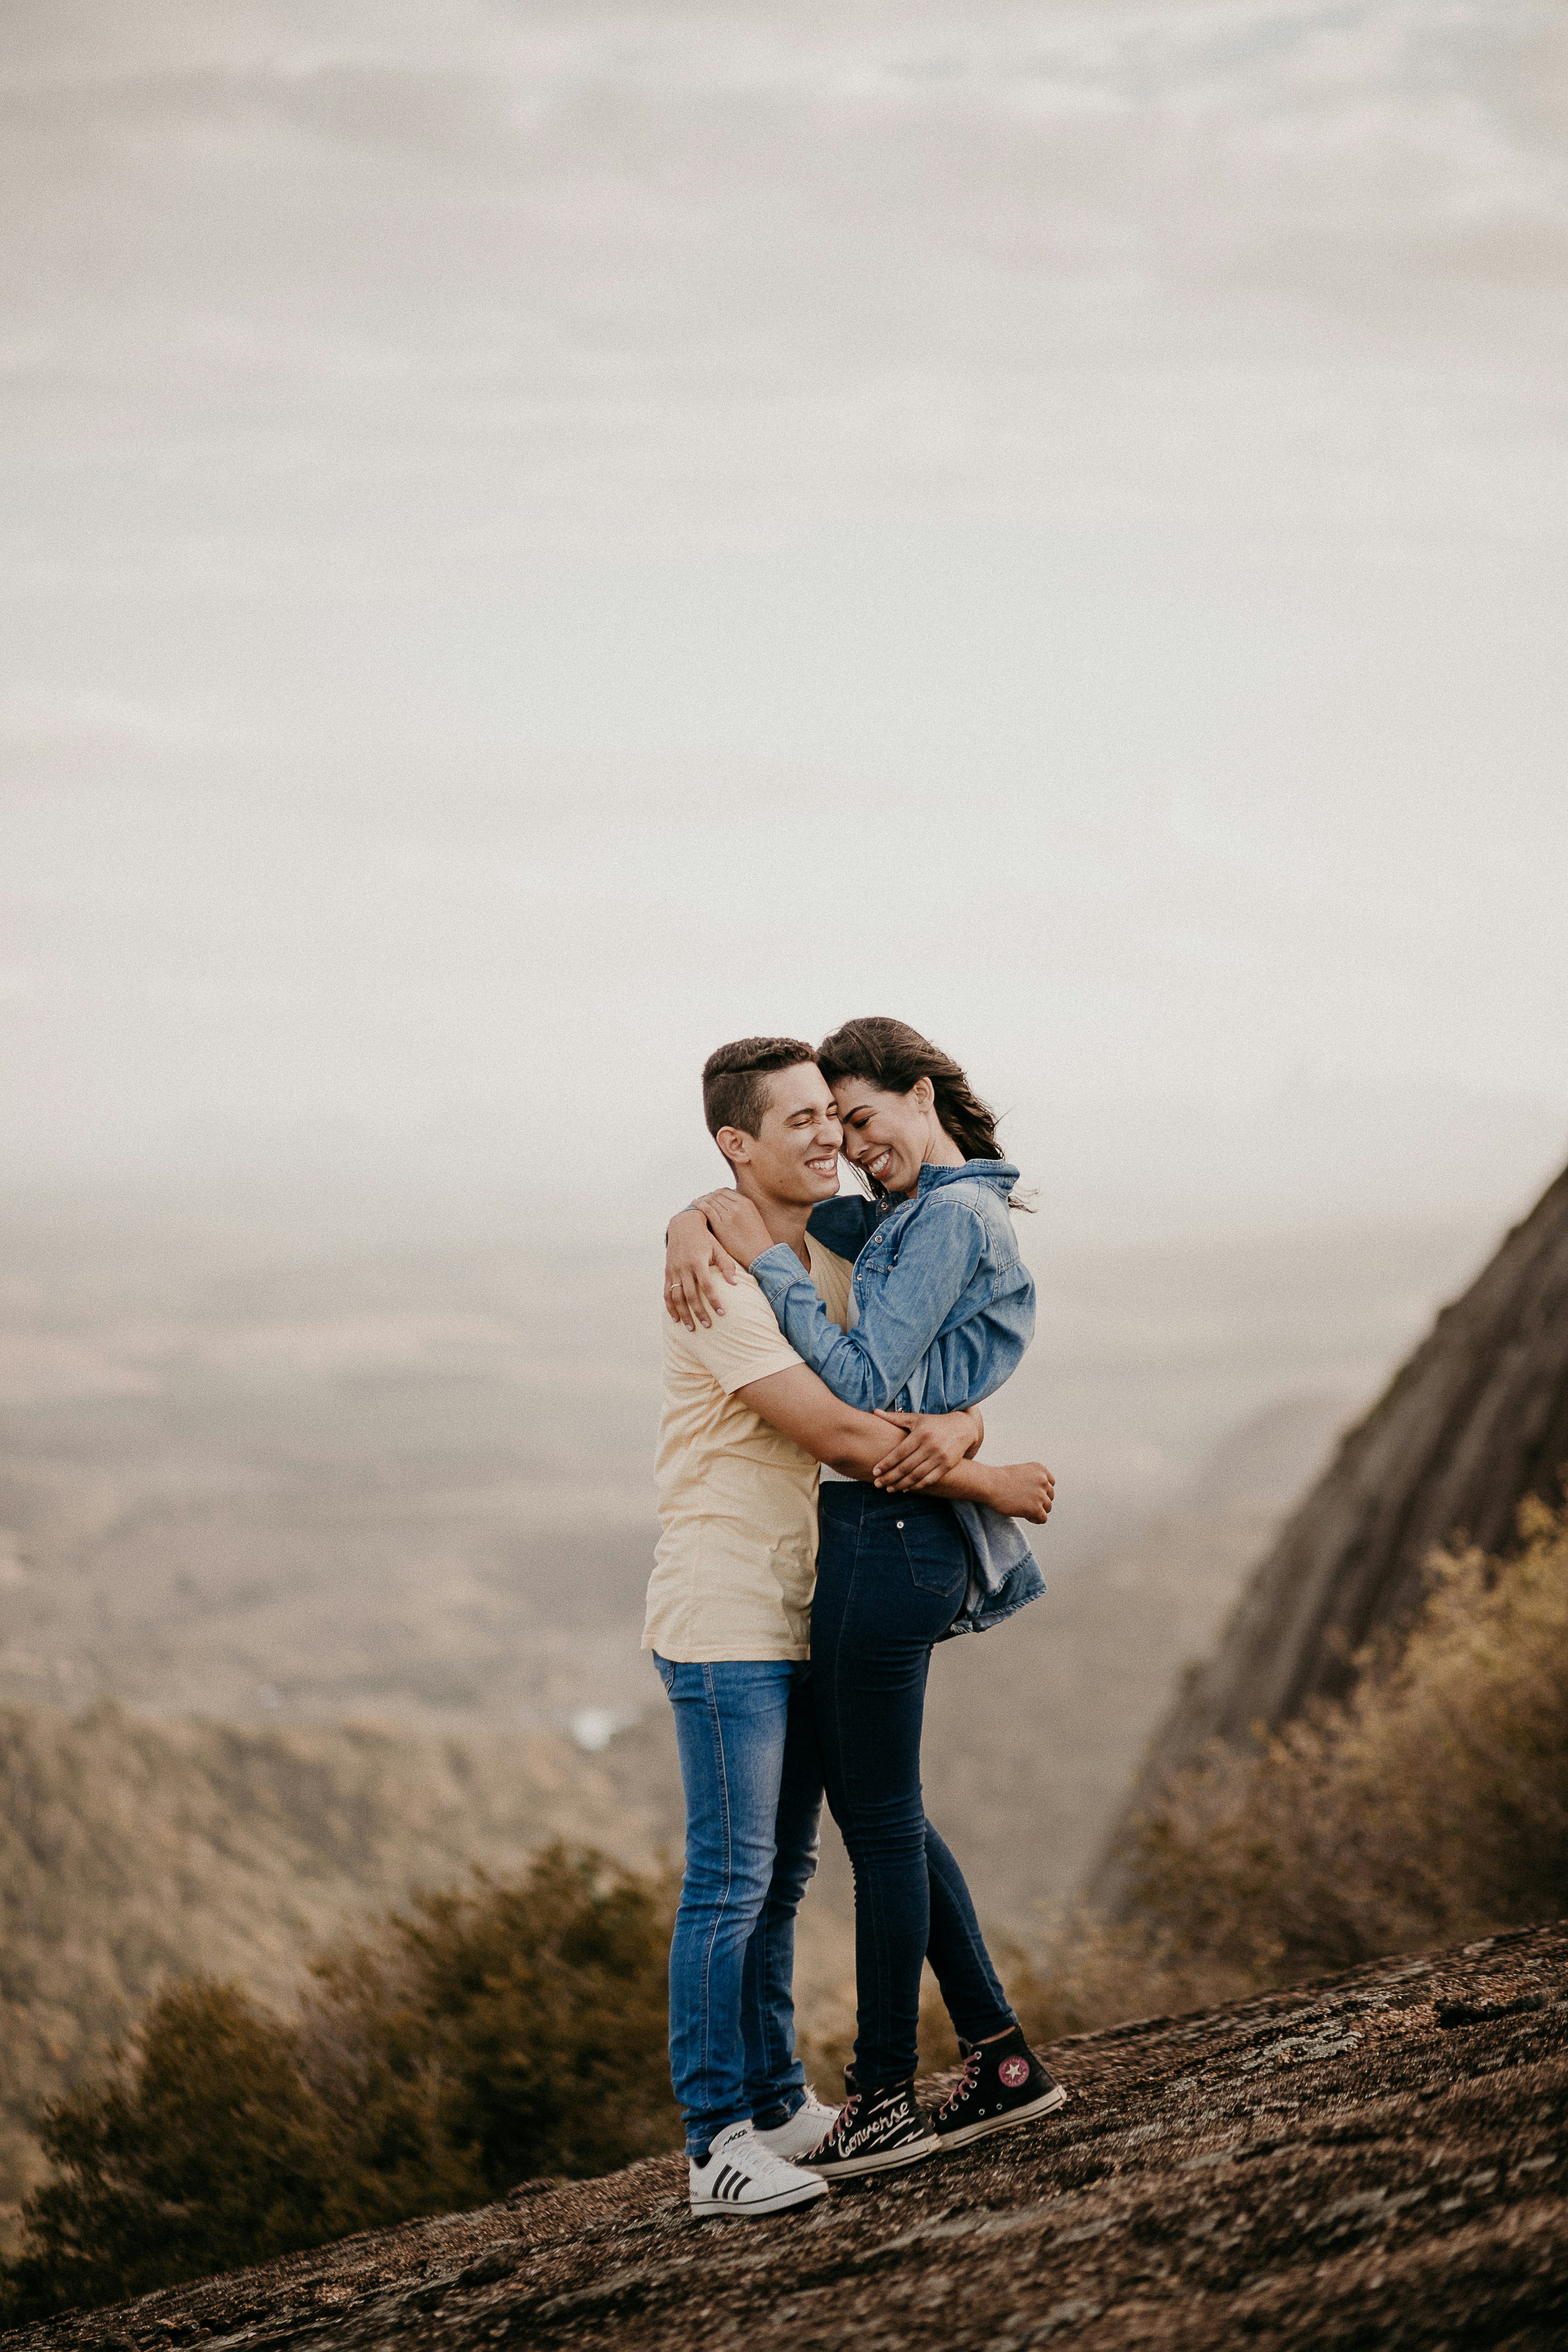 great photo recipe,how to photograph man in blue denim jeans carrying woman in white long sleeve shirt